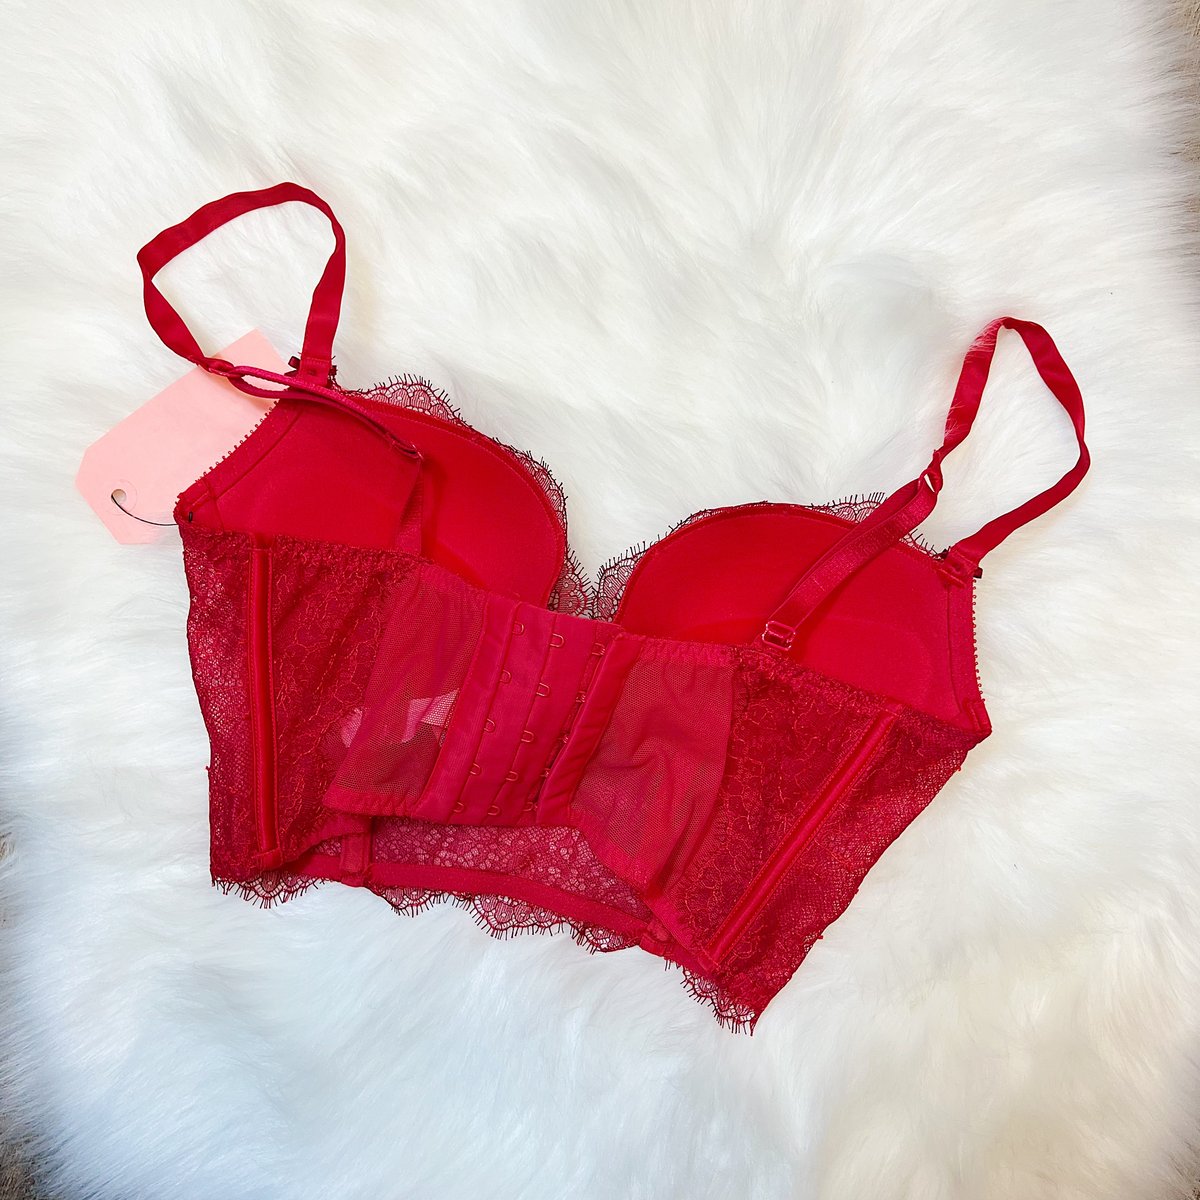 Size 32D/34C - Victoria's Secret Very Sexy Red Lace Bustier